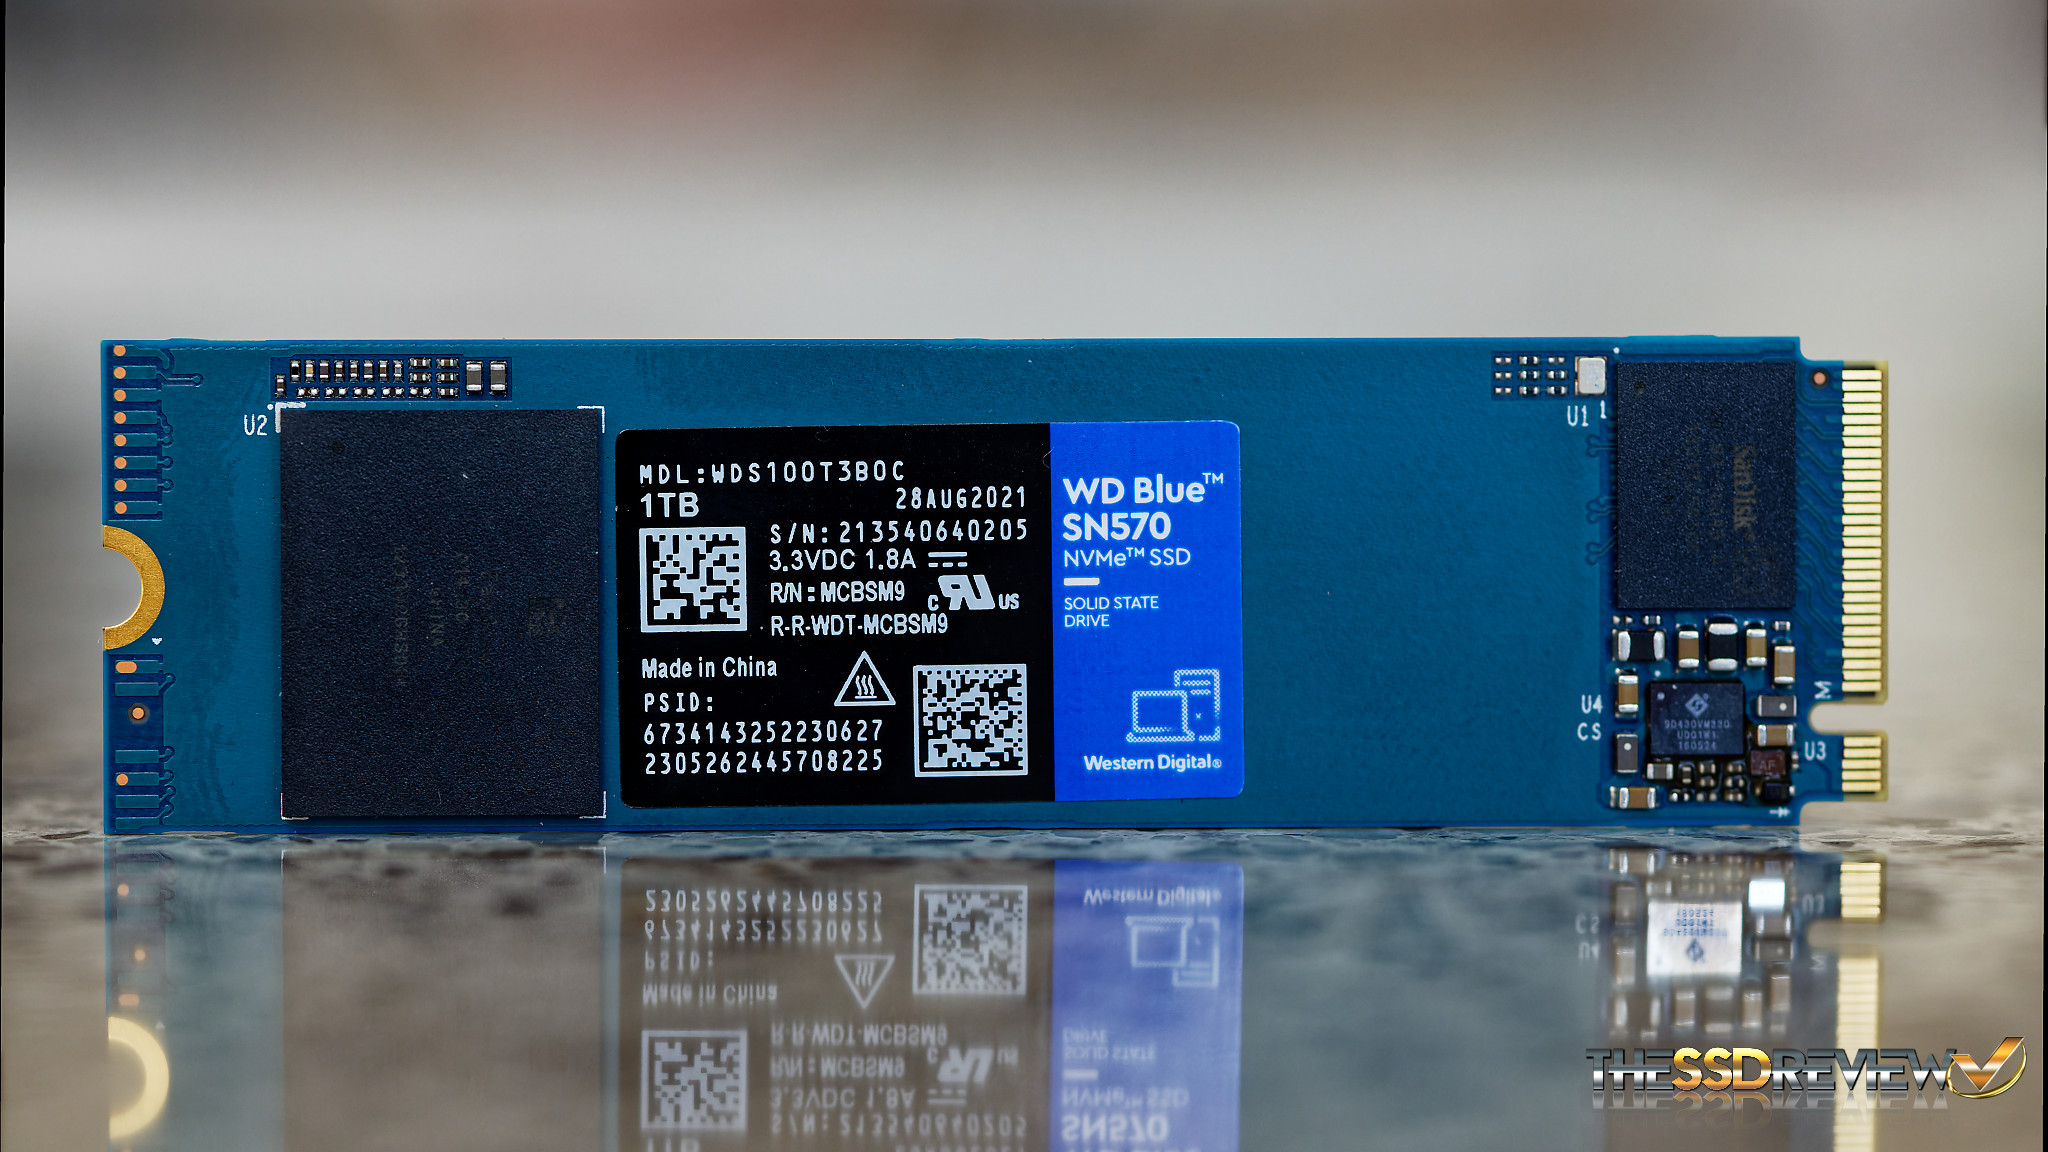 WD Blue SN570 Gen3 NVMe SSD Review - Performance and Value in a 